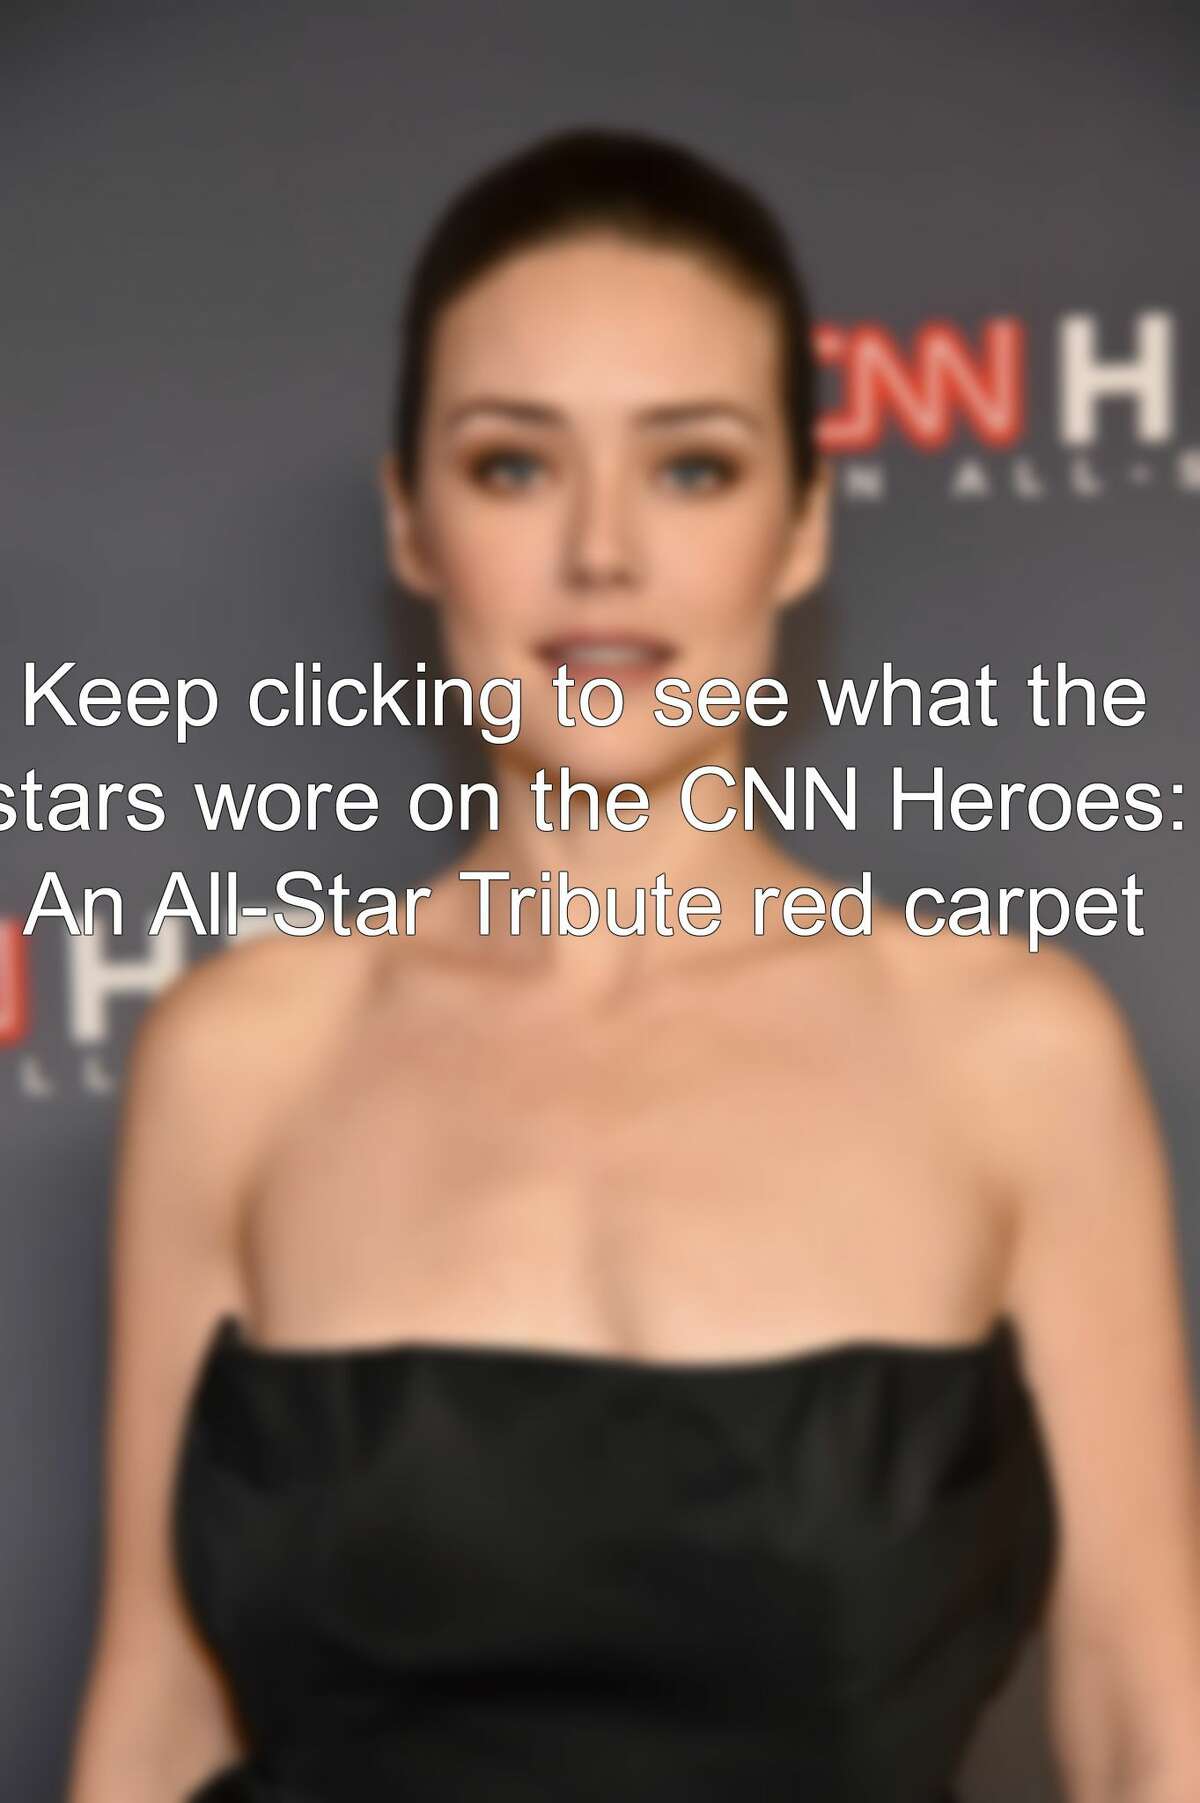 Keep clicking to see what they stars wore on the CNN Heroes: An All-Star Tribute red carpet